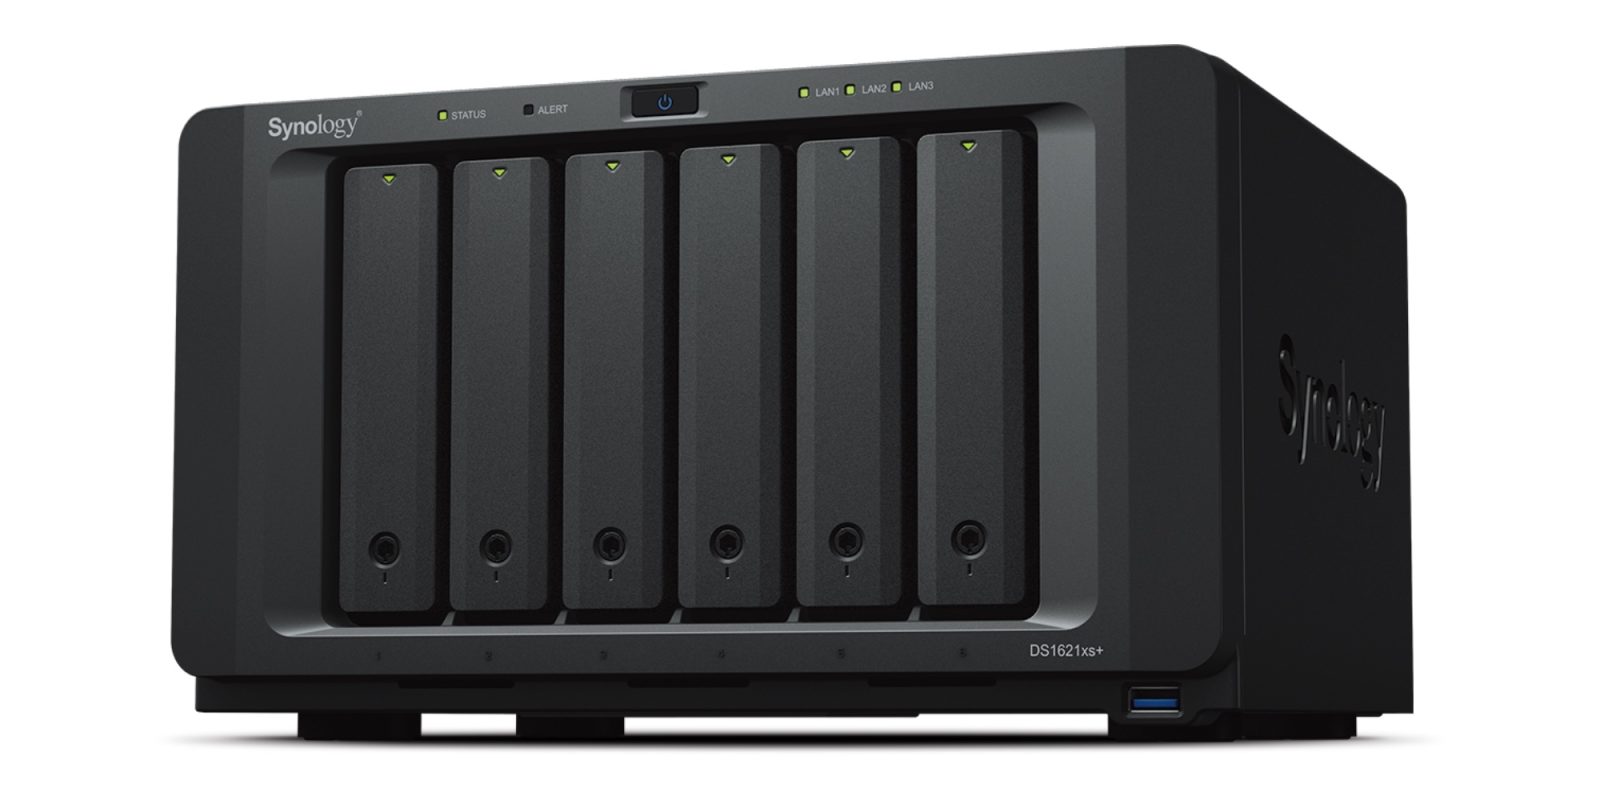 Synology DS1621xs+ NAS debuts with 10GbE and more 9to5Toys